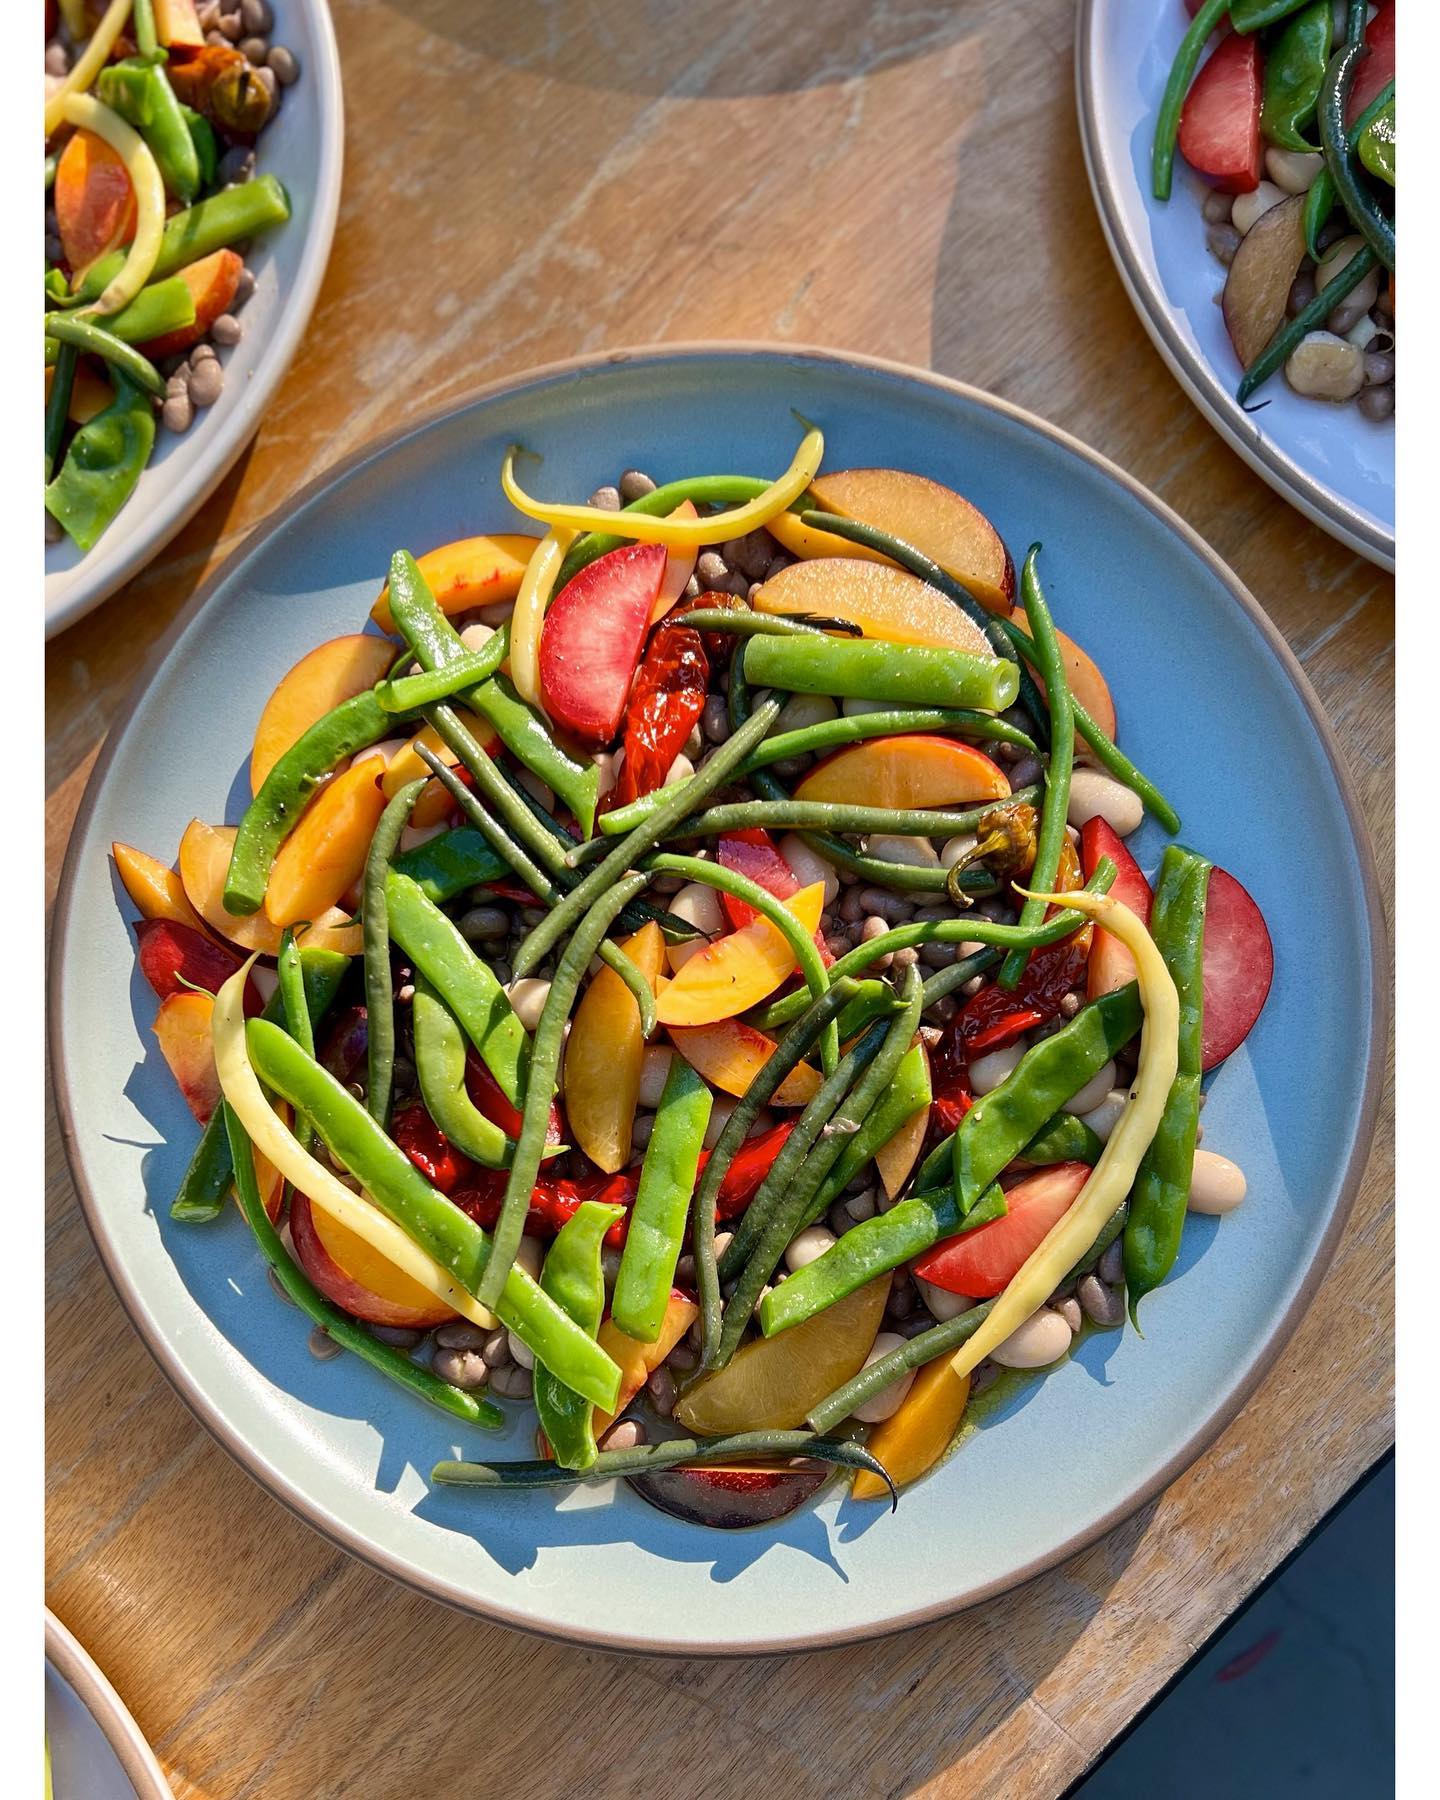 A plate of summer peaches and green beans